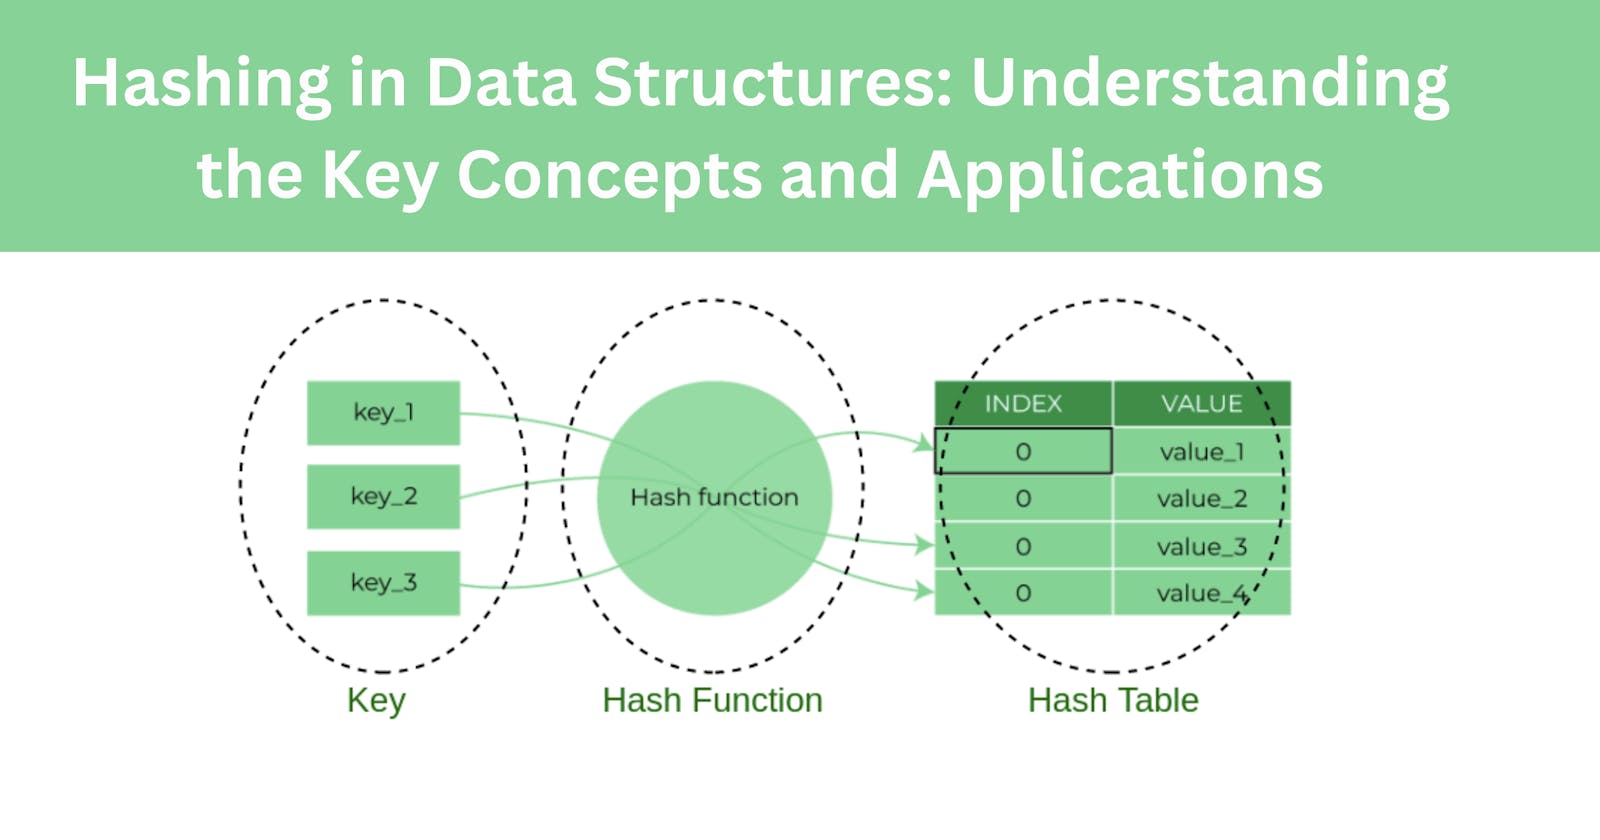 Hashing in Data Structures: Understanding the Key Concepts and Applications